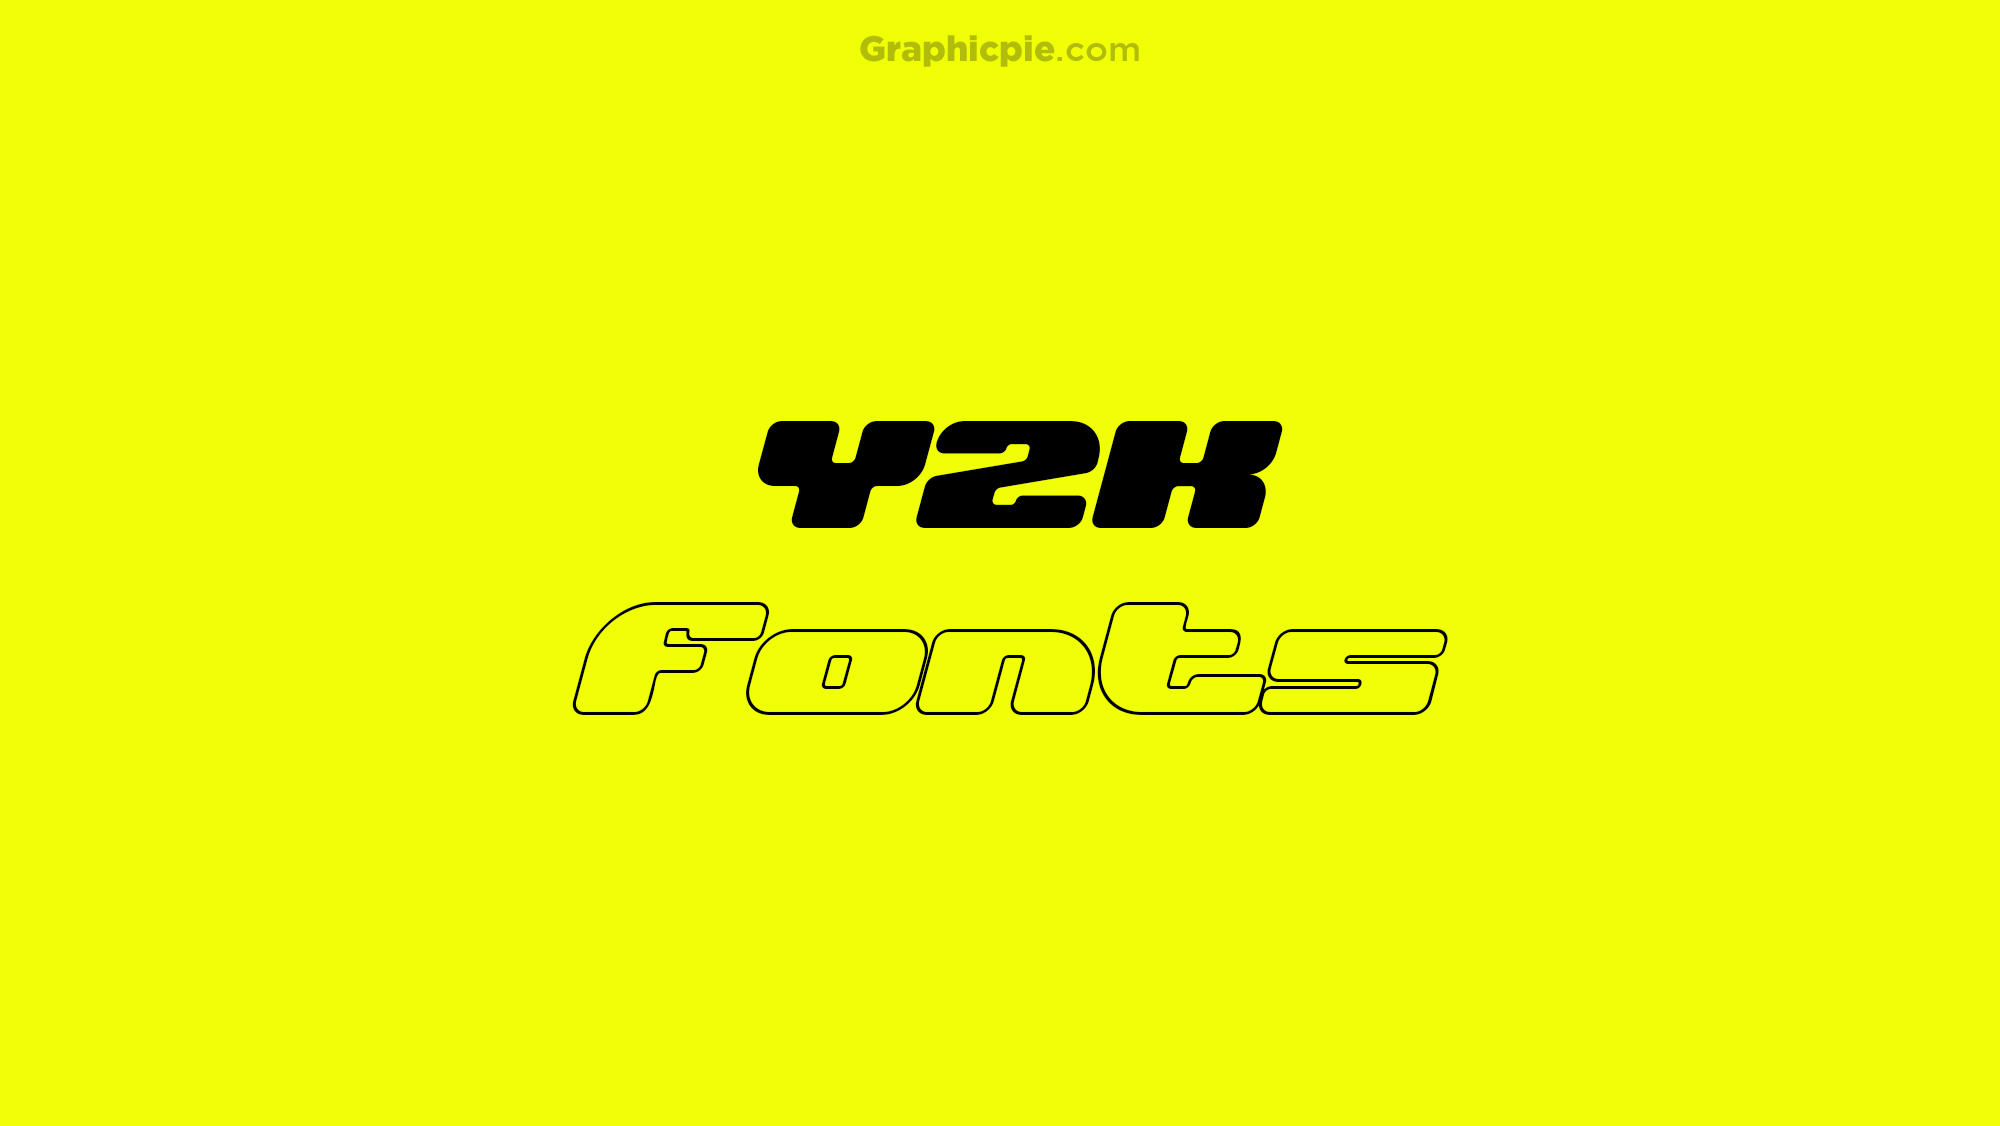 Excelorate - Free Y2K font  Graphic design fonts, Aesthetic fonts